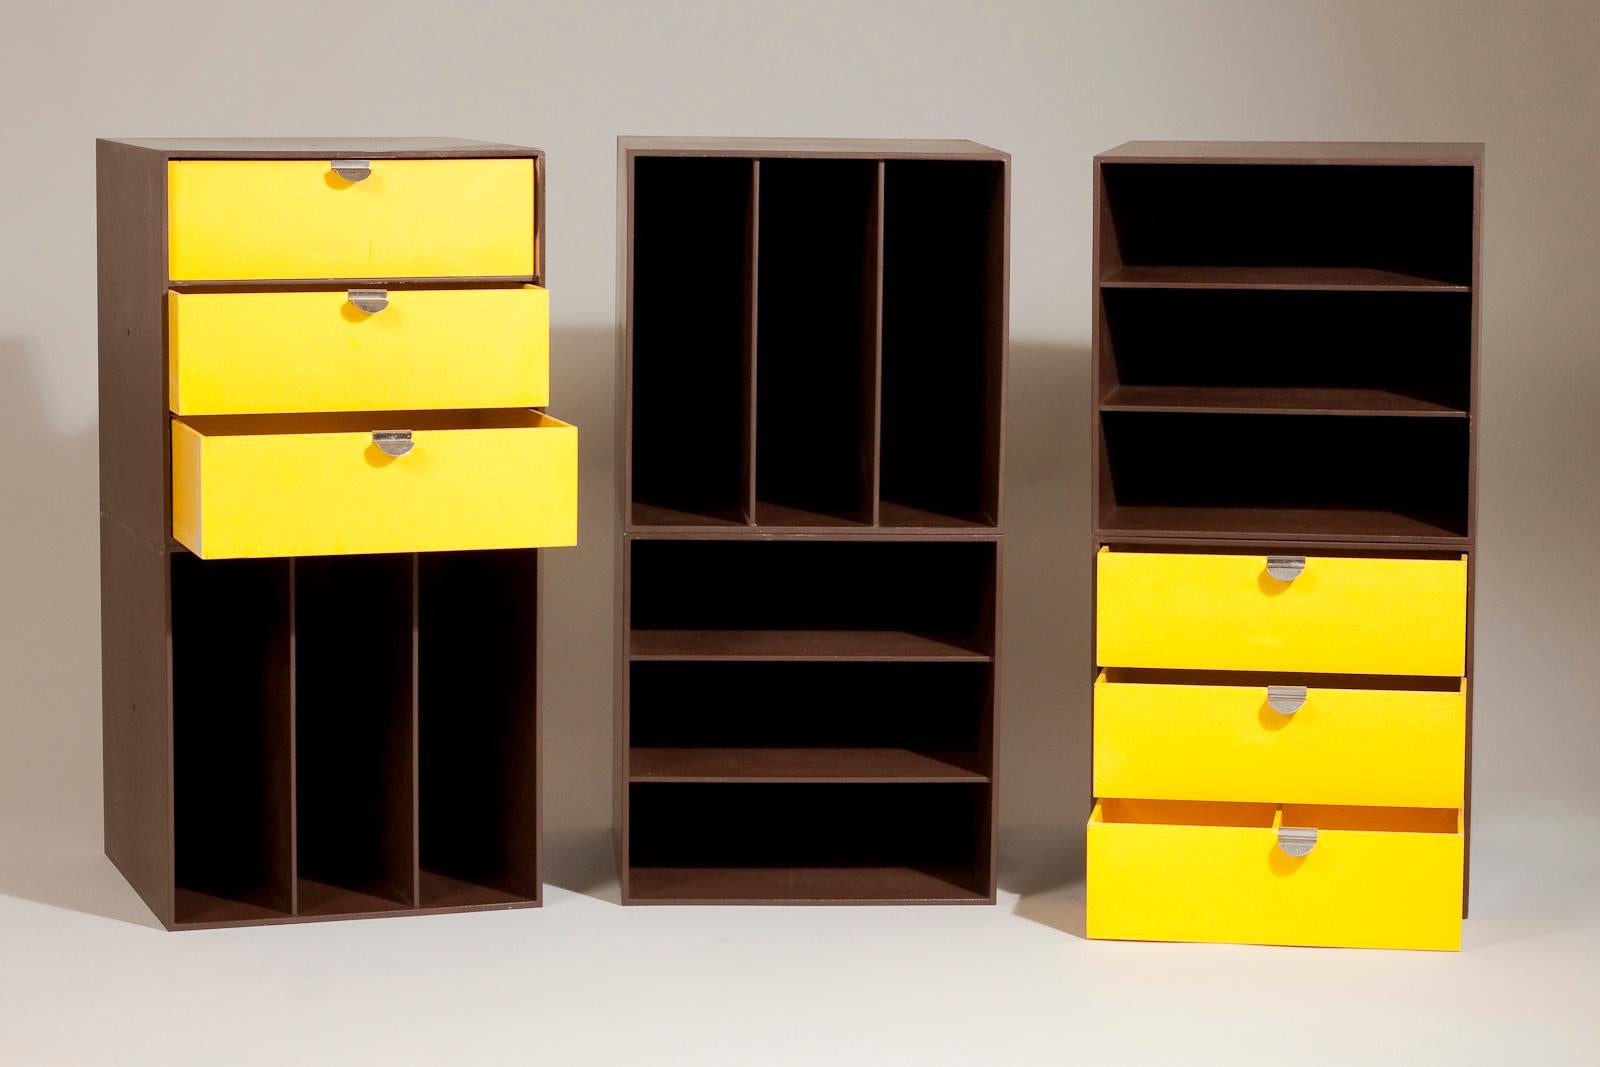 Set of six Finnish Mid-Century Modern brown and yellow 1960s storage box units designed by Ristomatti Ratia for Treston Oy. The storage boxes can be matched in different ways to create numerous combinations. The shelving system is perfectly suited